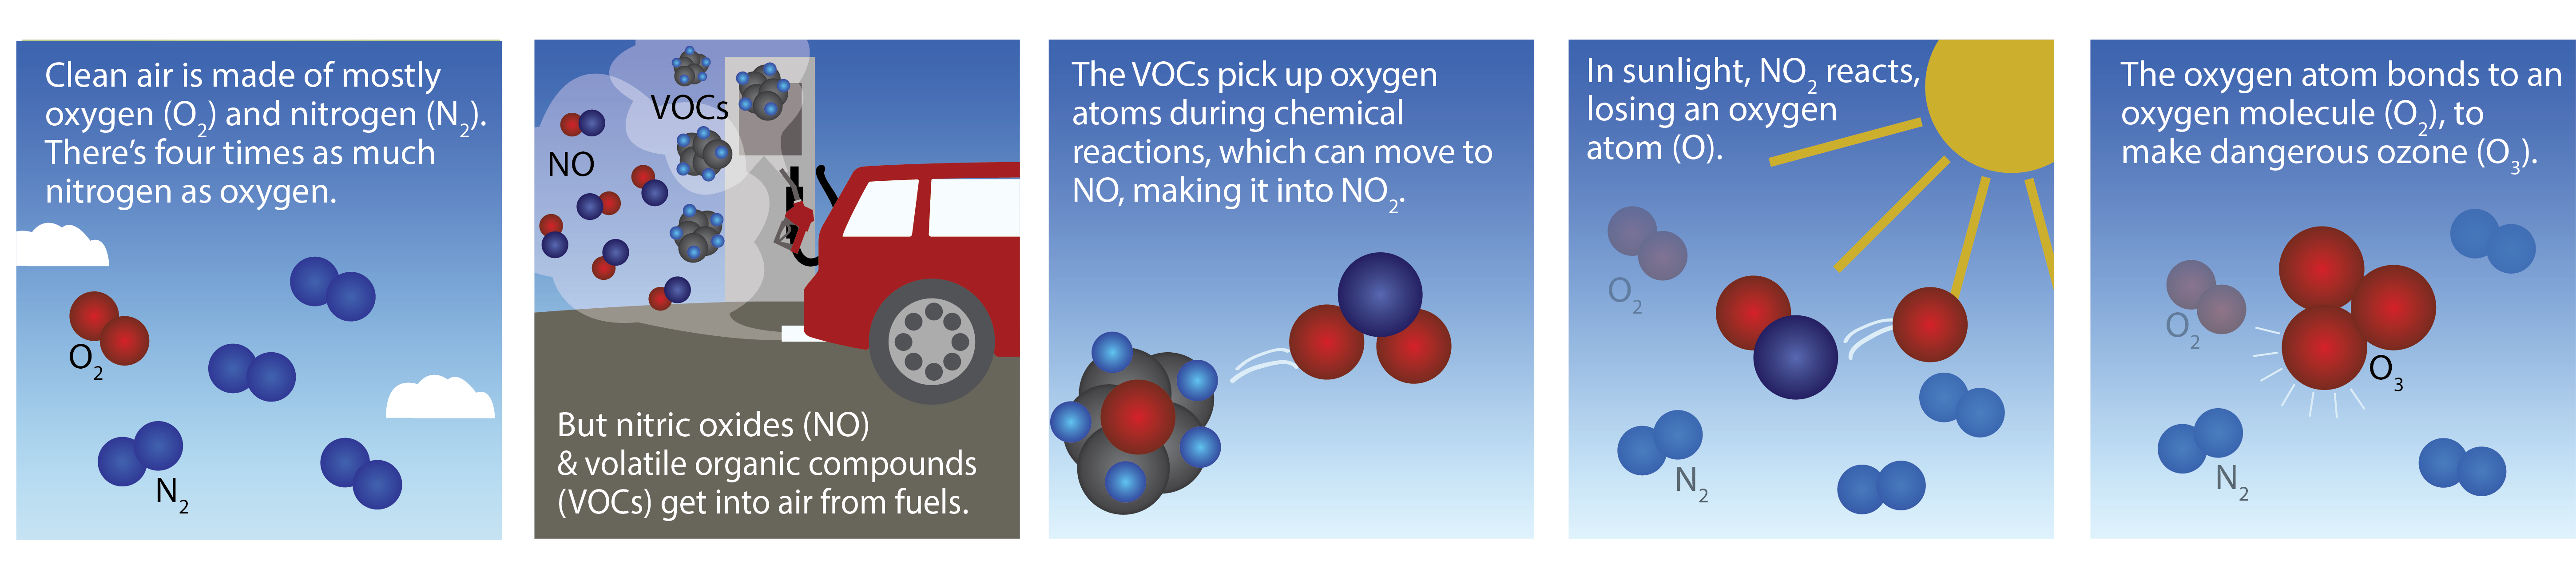 The Source and Creation of Ozone